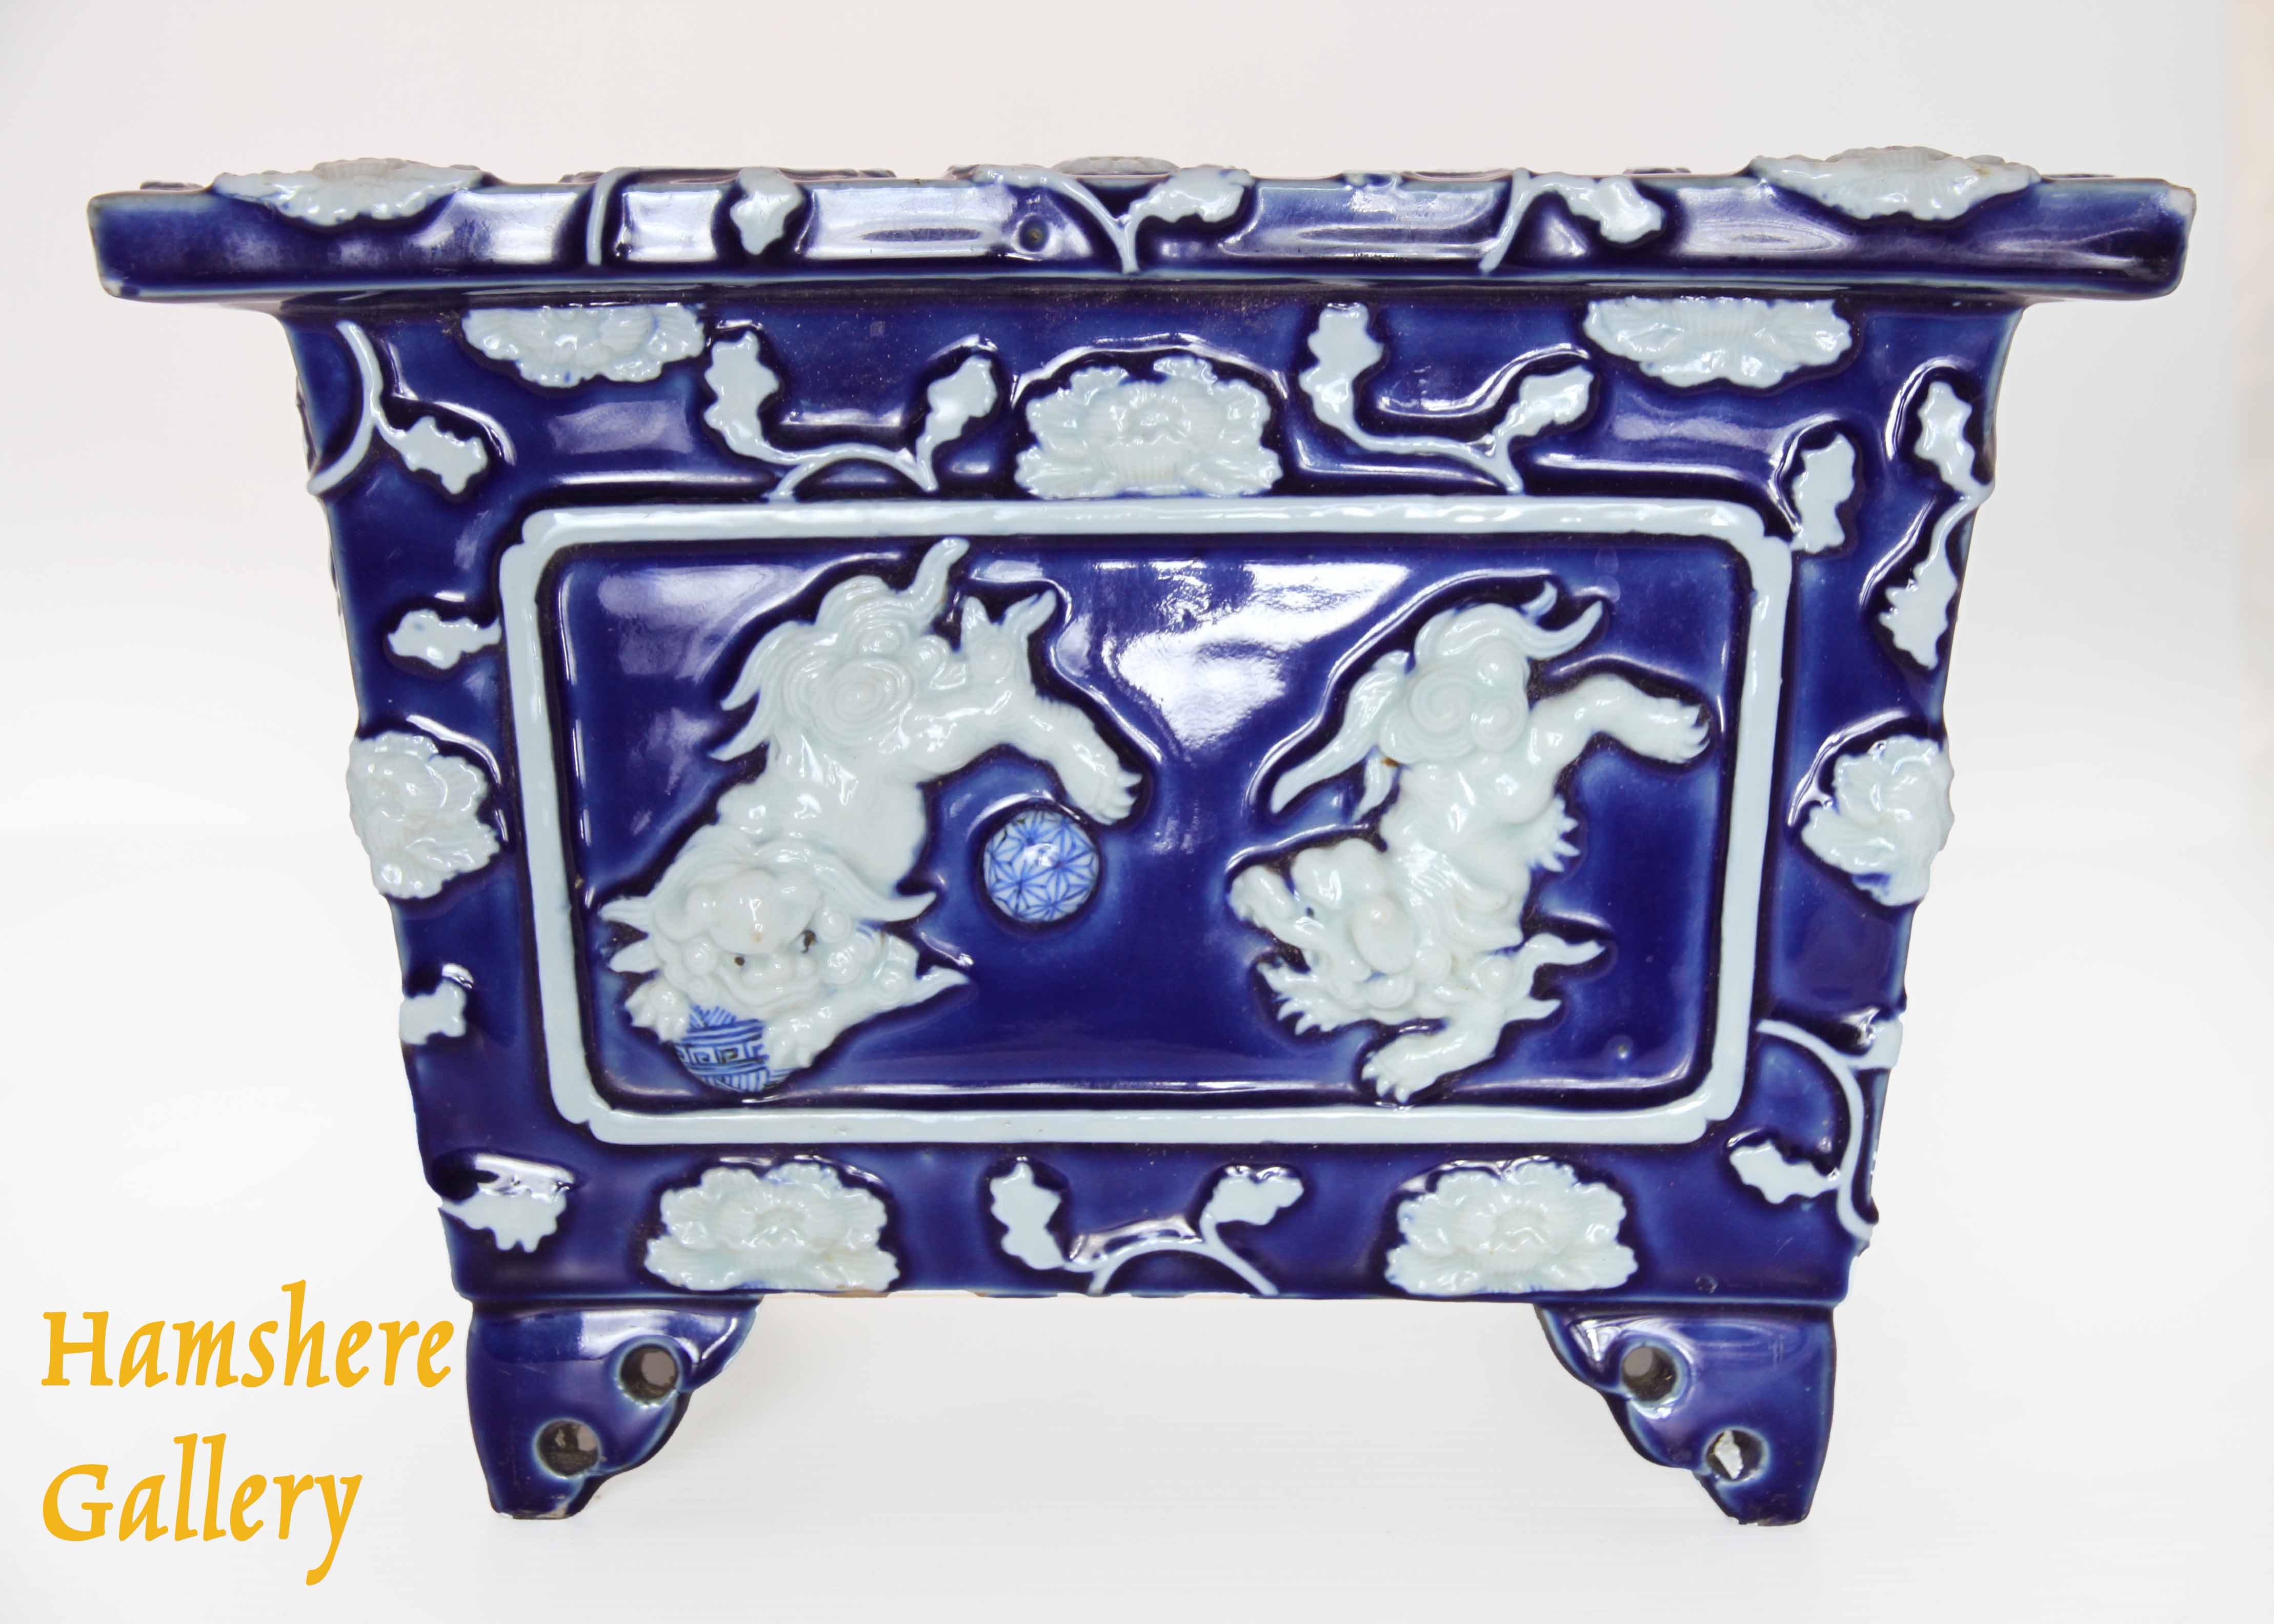 Click for larger image: 19th century English, square Minton Majolica cobalt and Shi Shi jardiniere - 19th century English, square Minton Majolica cobalt and Shi Shi jardiniere